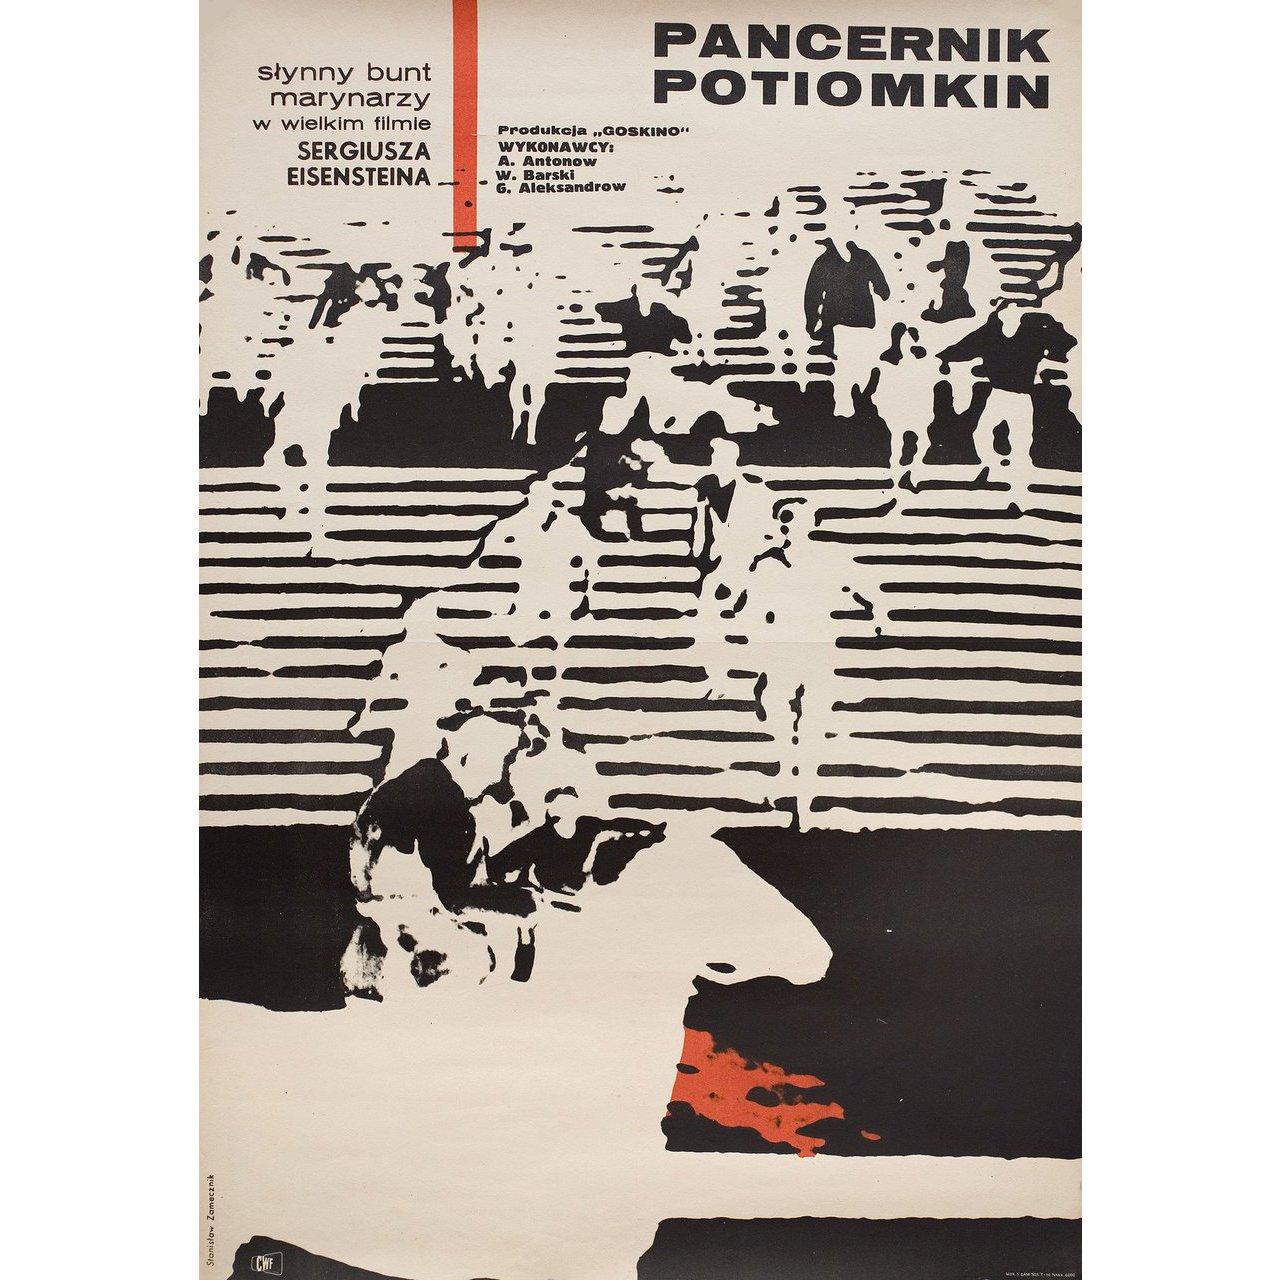 Original 1967 re-release Polish A1 poster by Stanislaw Zamecznik for. Fine condition, folded. Many original posters were issued folded or were subsequently folded. Please note: the size is stated in inches and the actual size can vary by an inch or